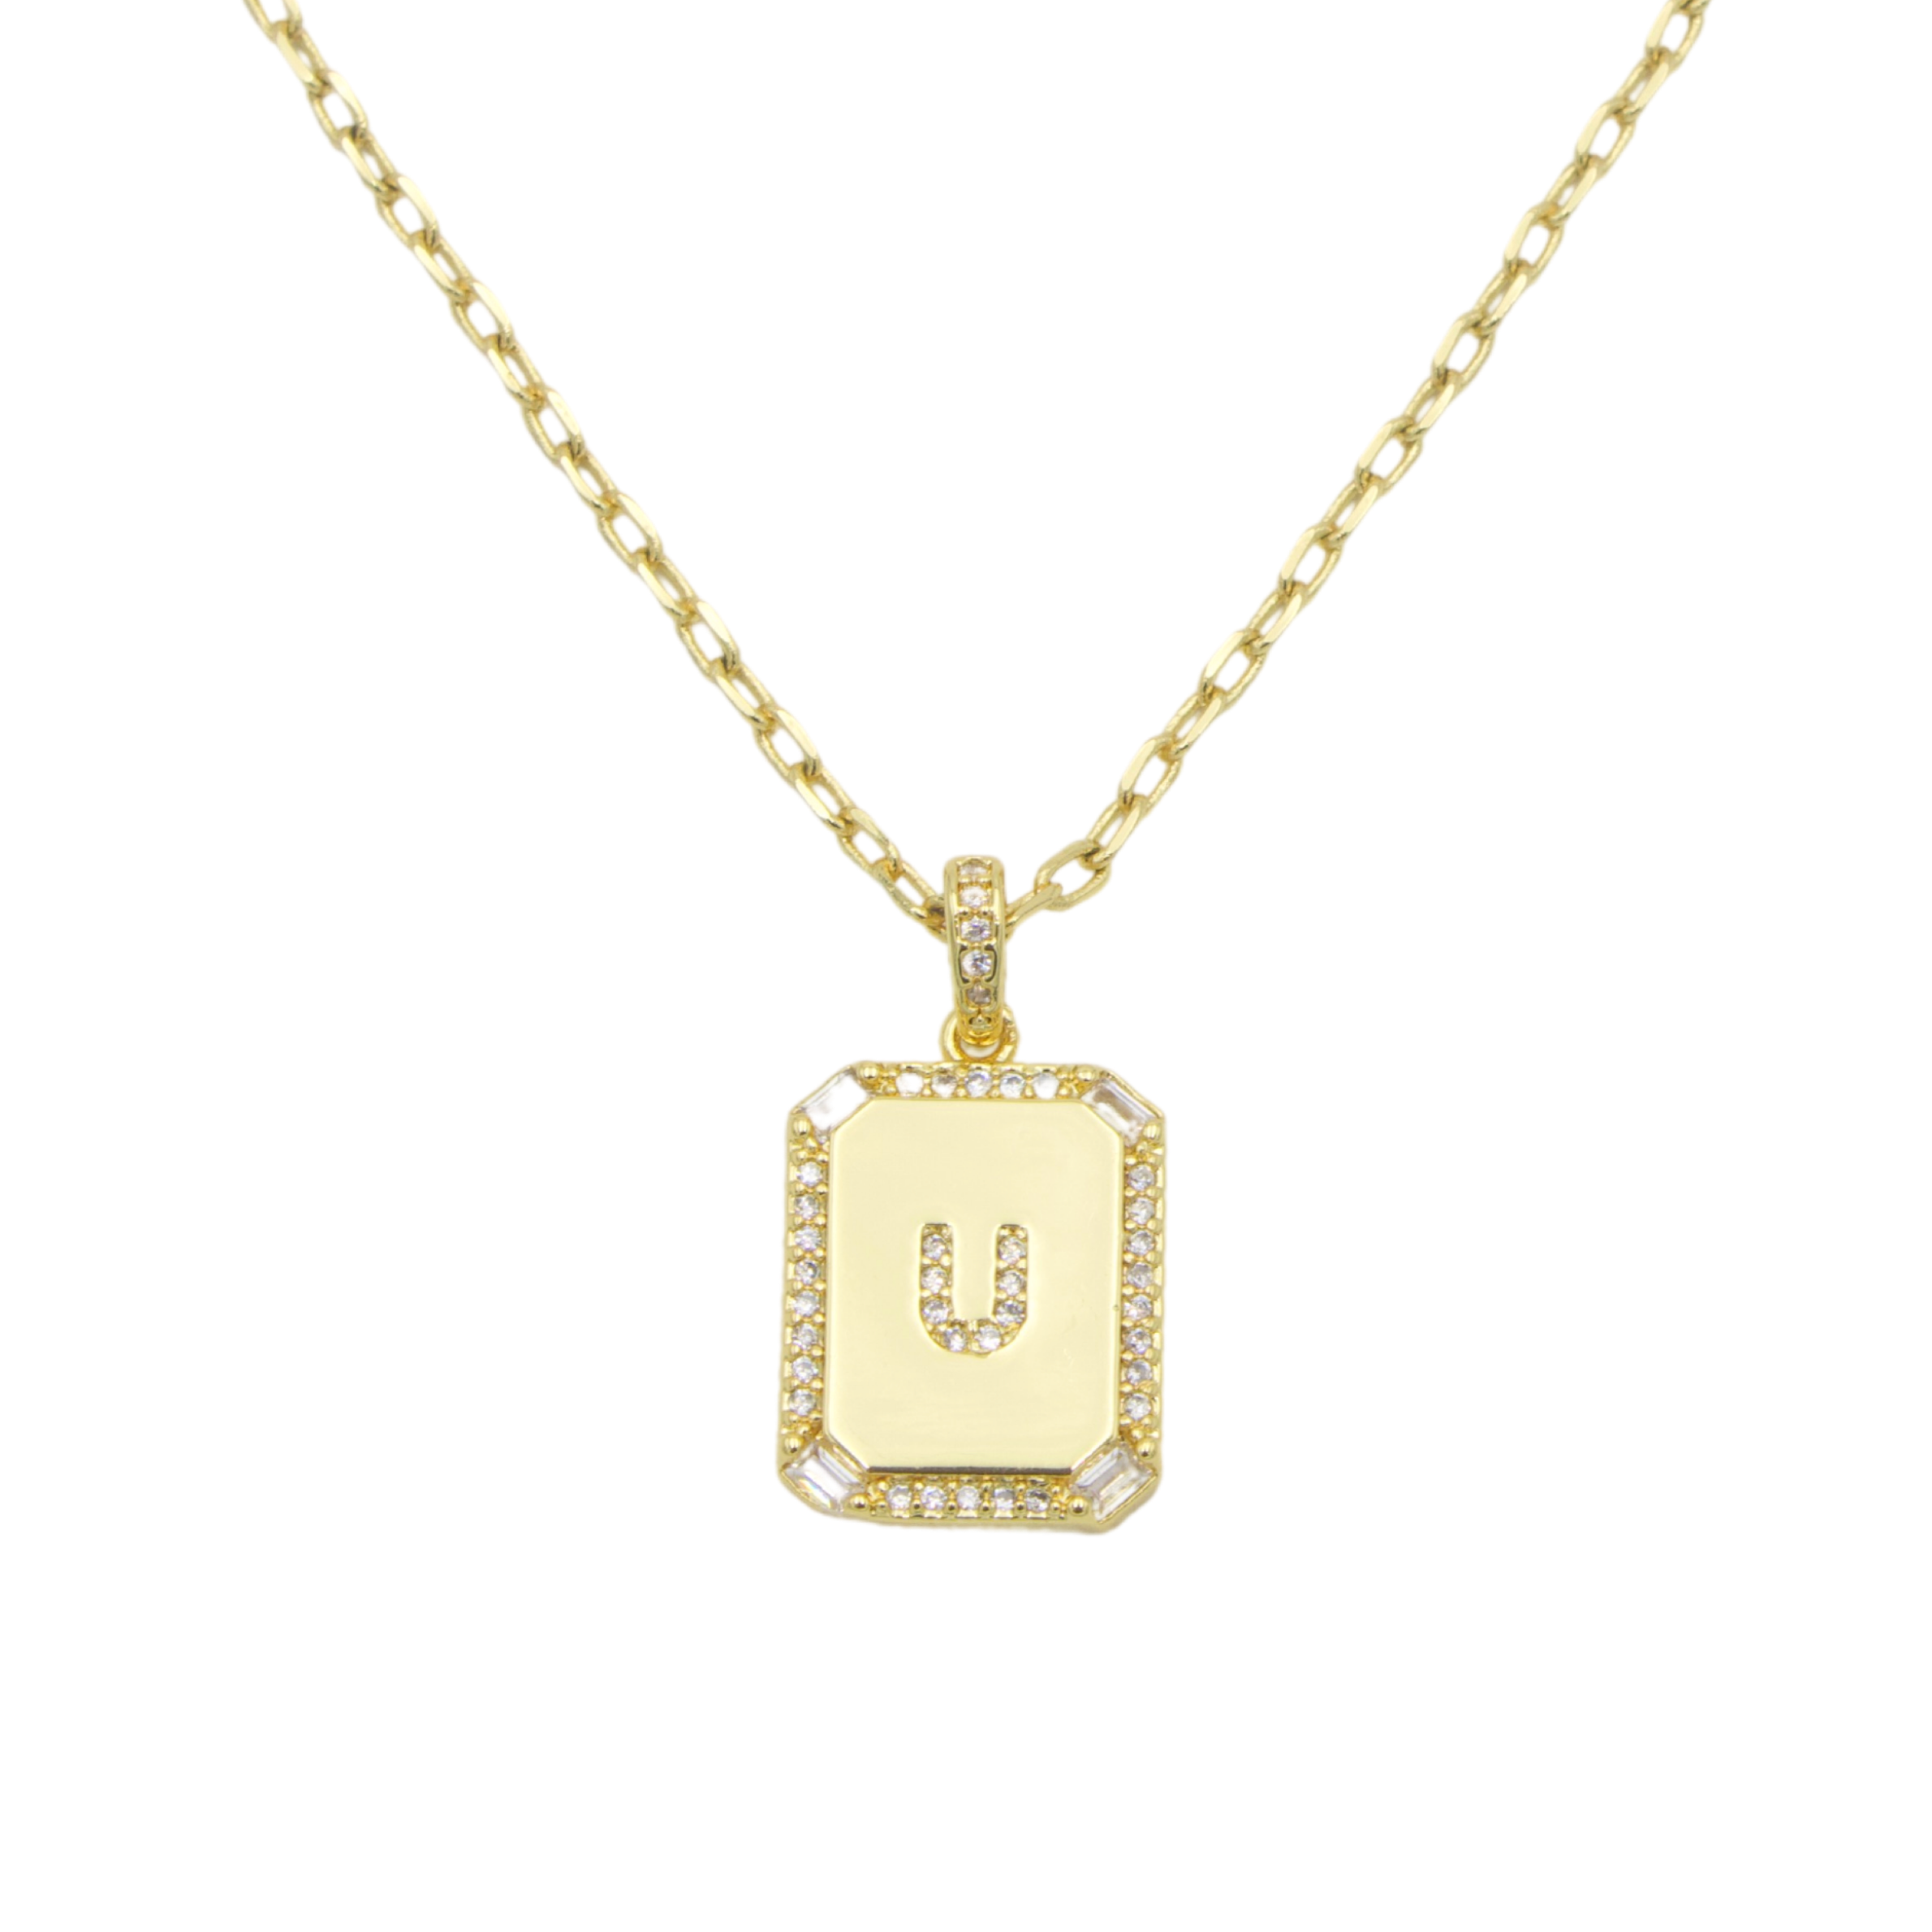 AW Boutique's gold filled 16 inch cable chain necklace finished with a dainty initial pendant with cubic zirconia detail. U initial shown.